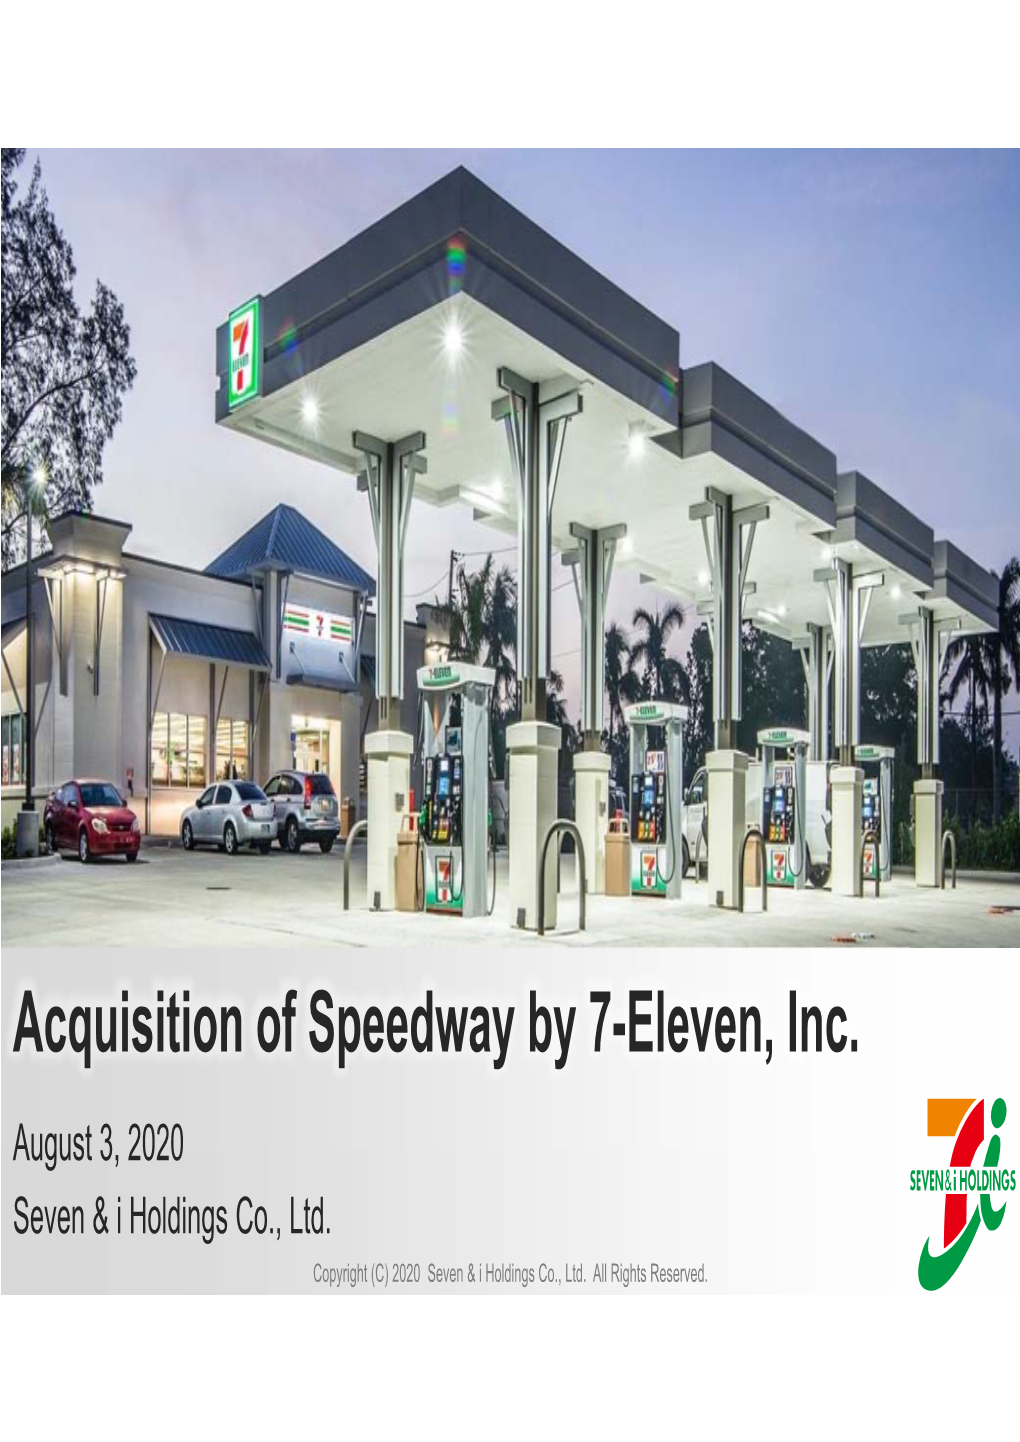 Acquisition of Speedway by 7-Eleven, Inc. August 3, 2020 Seven & I Holdings Co., Ltd